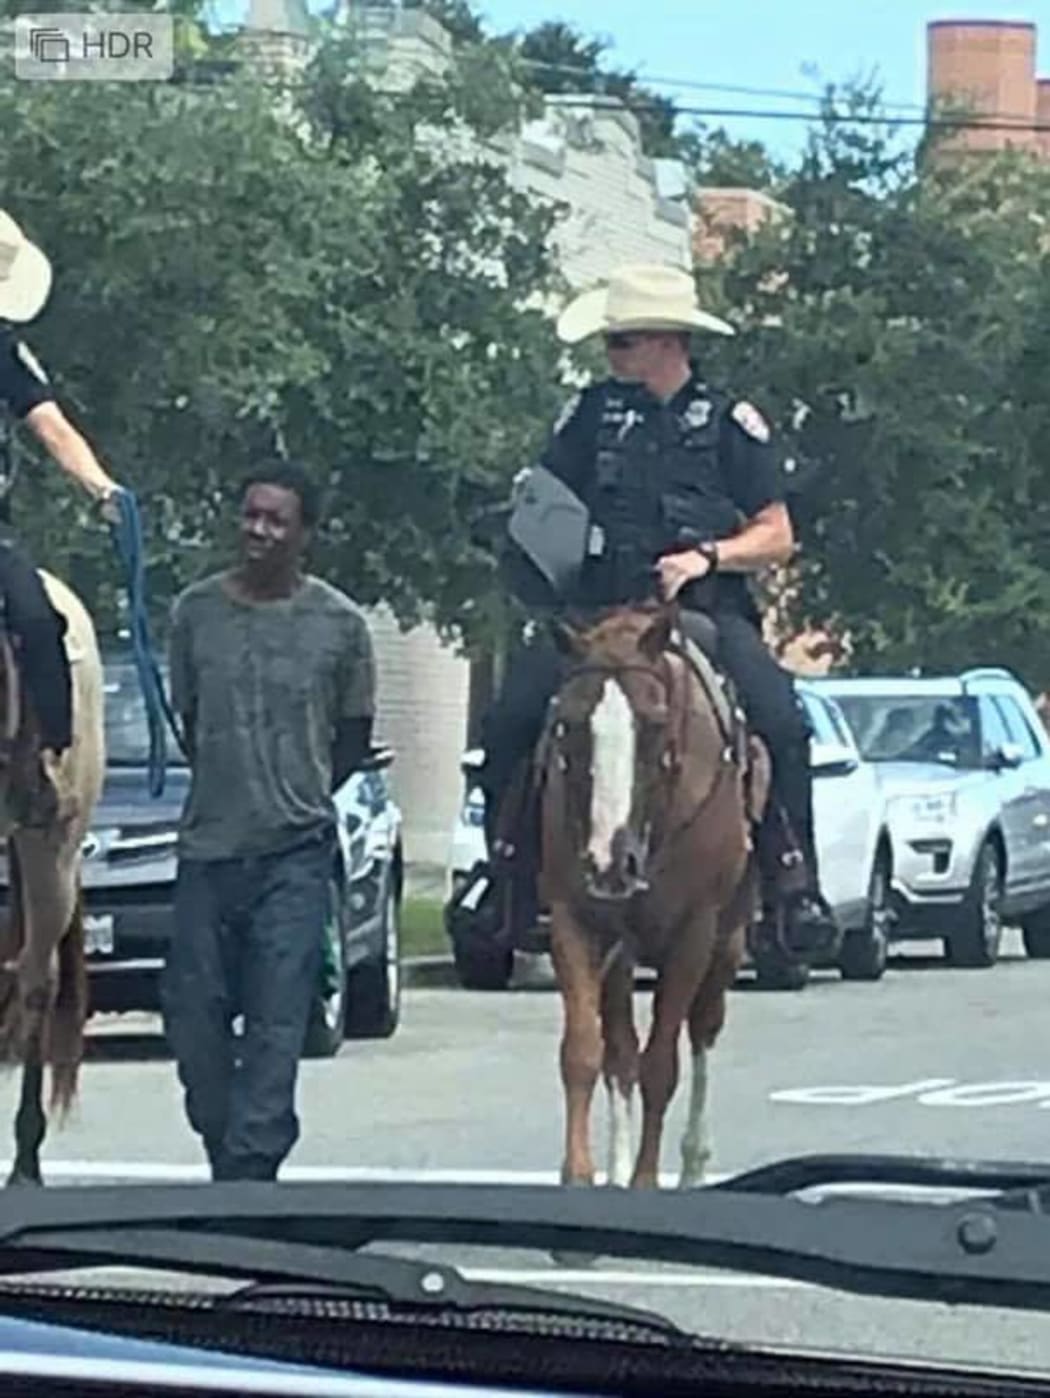 blacTexas police have apologised after an image of two white officers on horseback leading a handcuffed k man by a rope caused an outcry online.